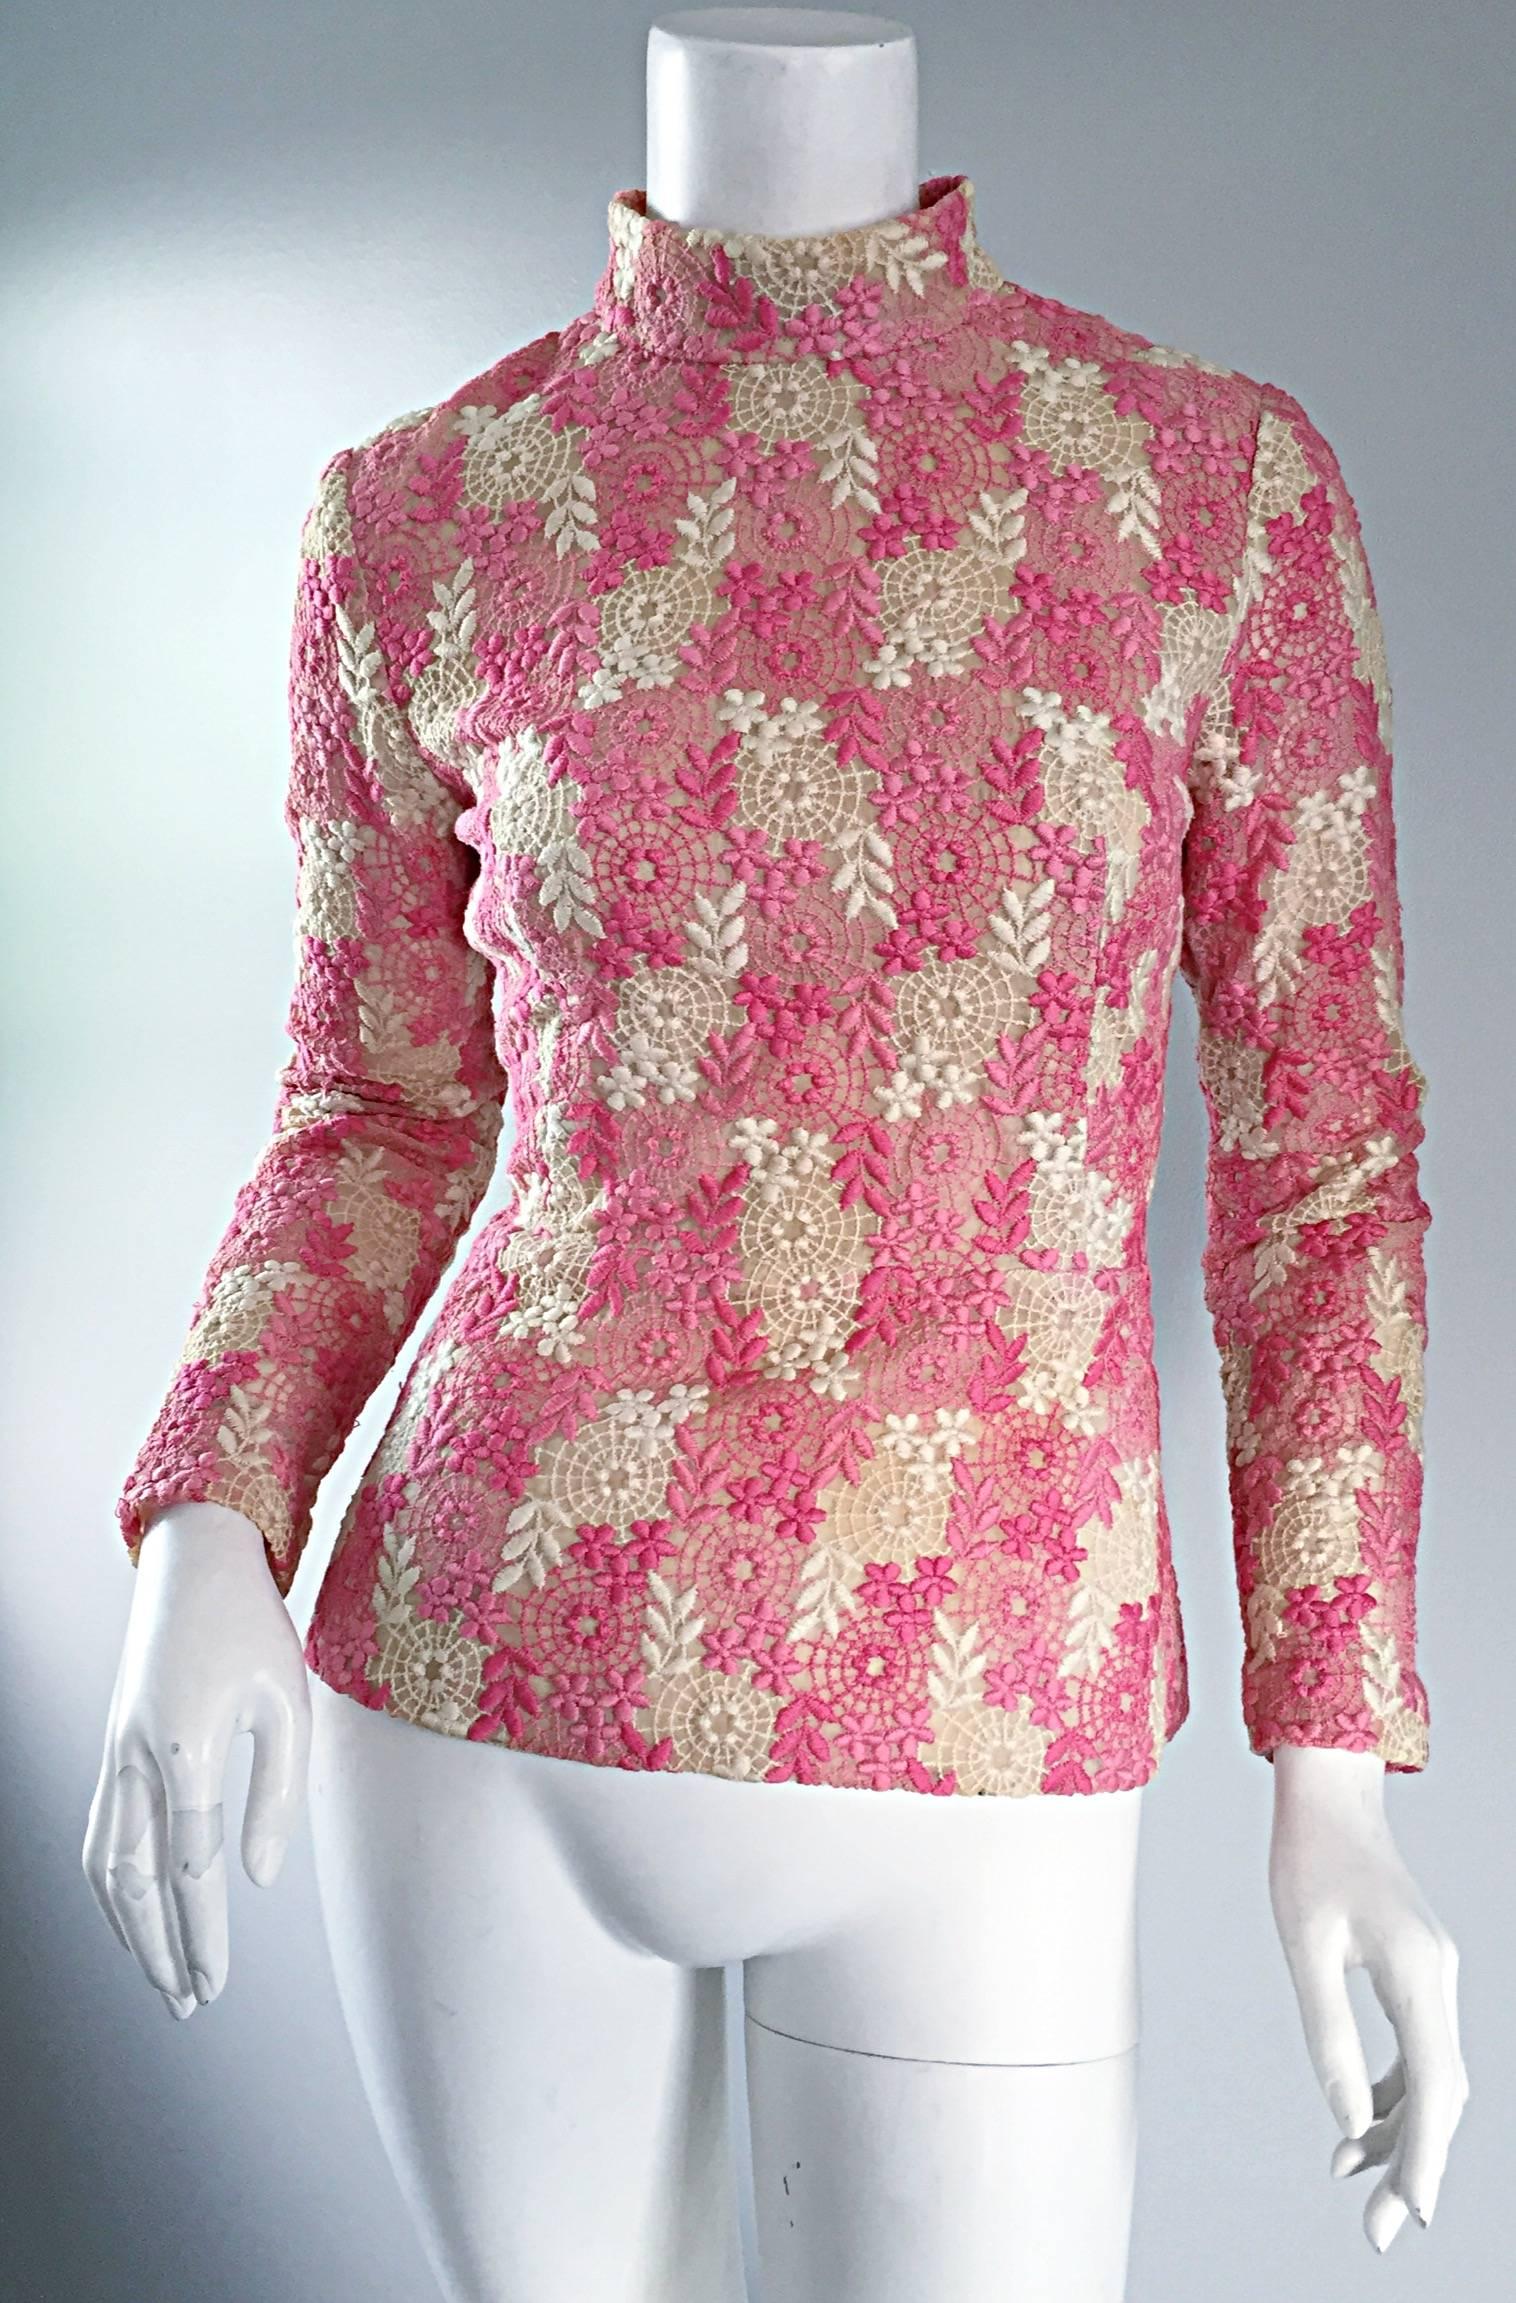 Absolutely Fabulous vintage Mignon 1960s blouse! Pink and ivory / white hand crochet work, lined in a soft nude silk. Great slim fit, that looks sensational on! Easily transitions into any wardrobe, and great for day or night. Great with shorts or